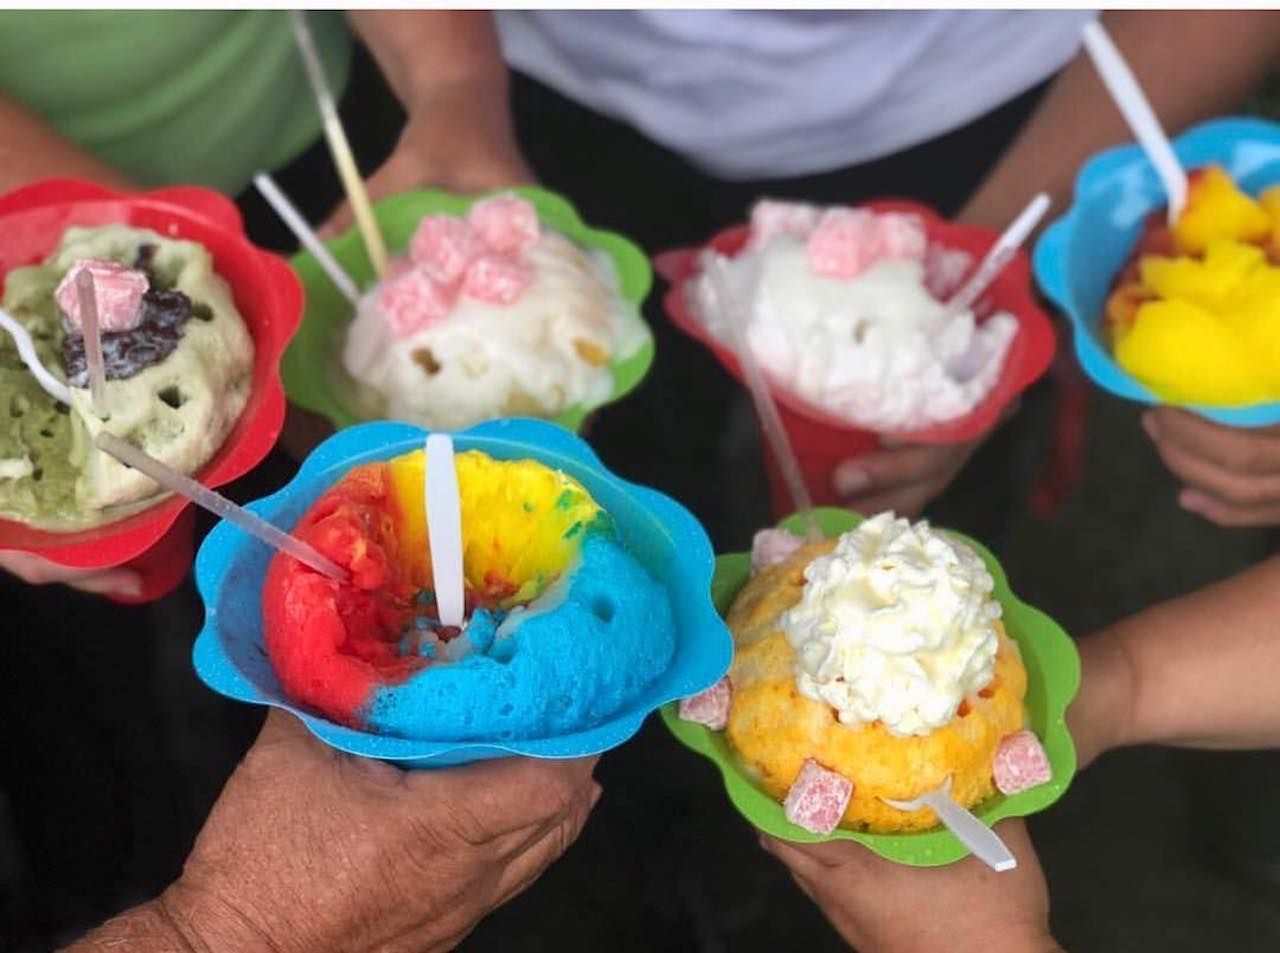 Shave ice in Hawaii